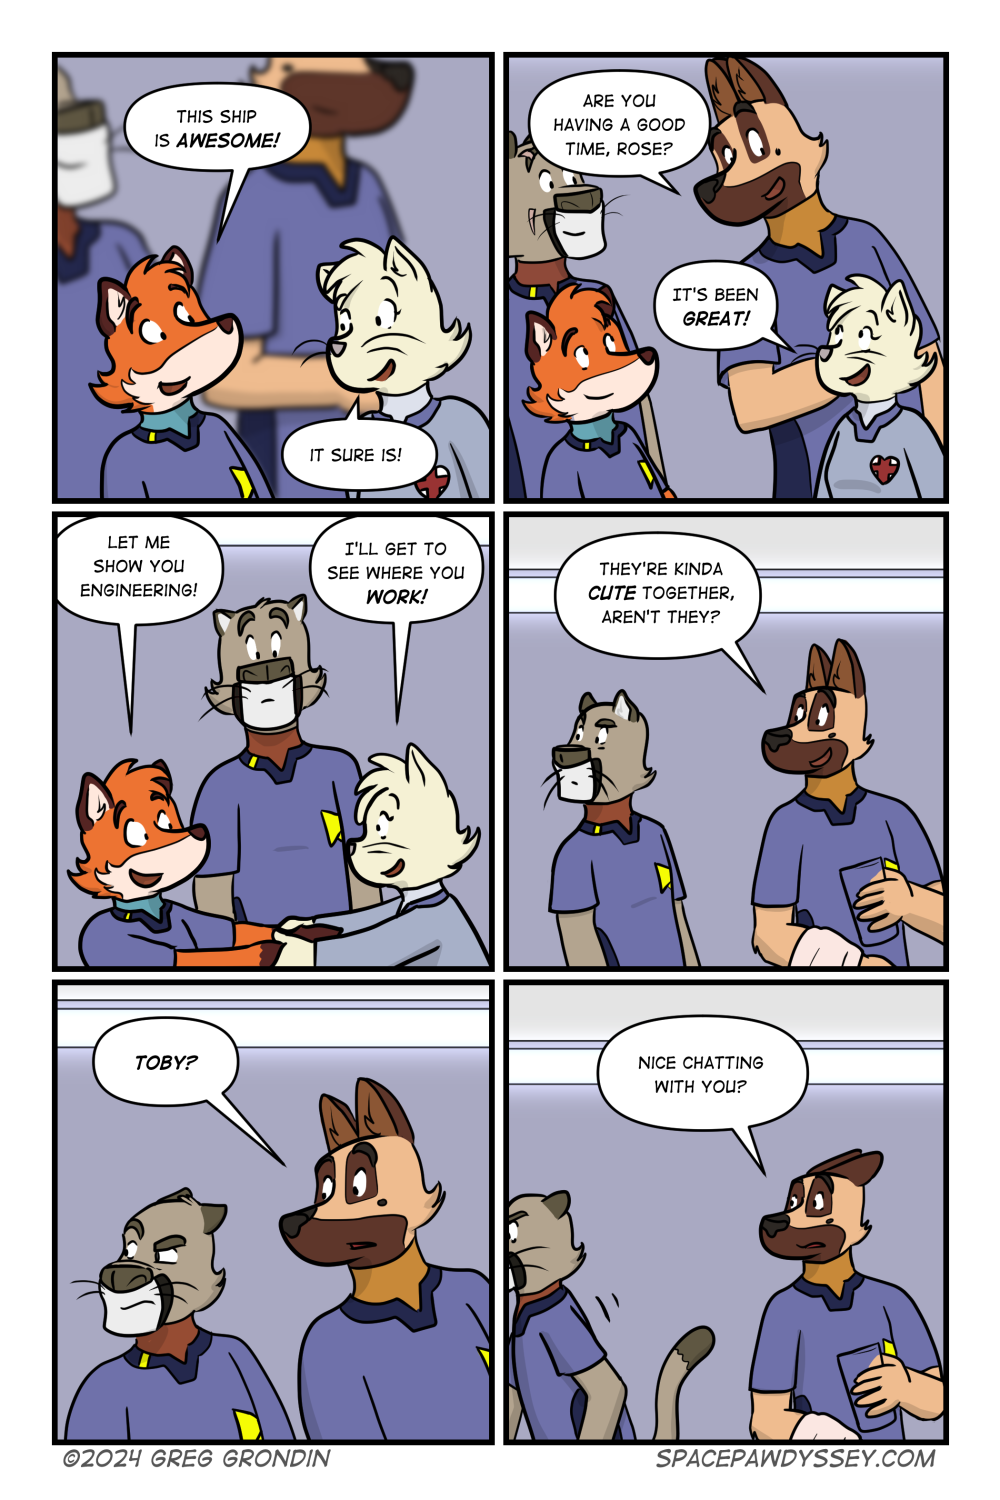 Space Pawdyssey #661